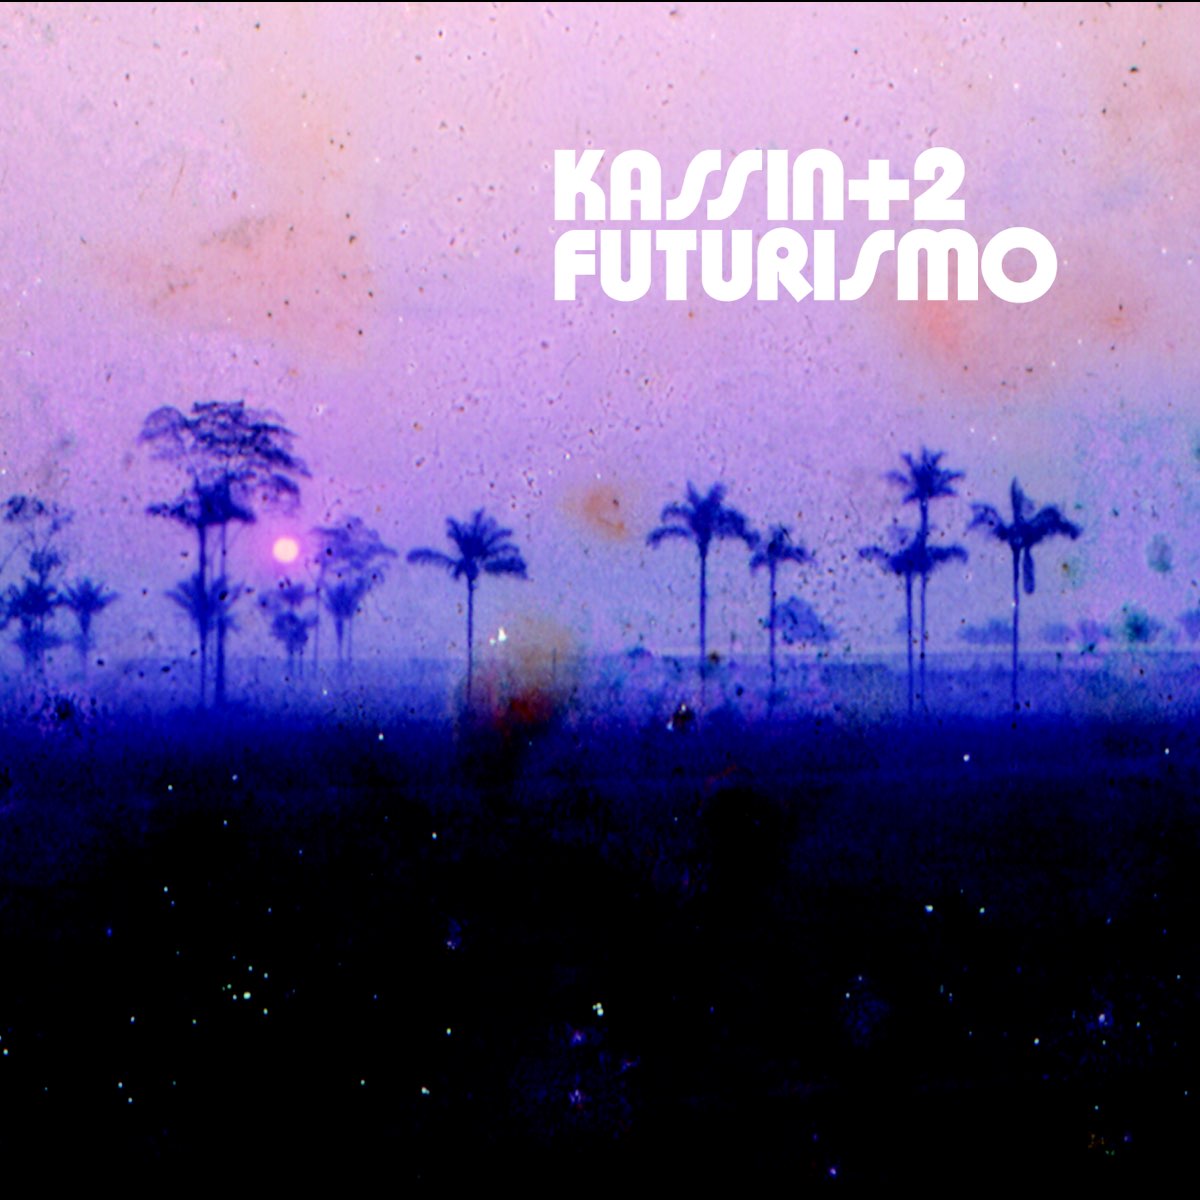 ‎Futurismo by Kassin + 2 on Apple Music